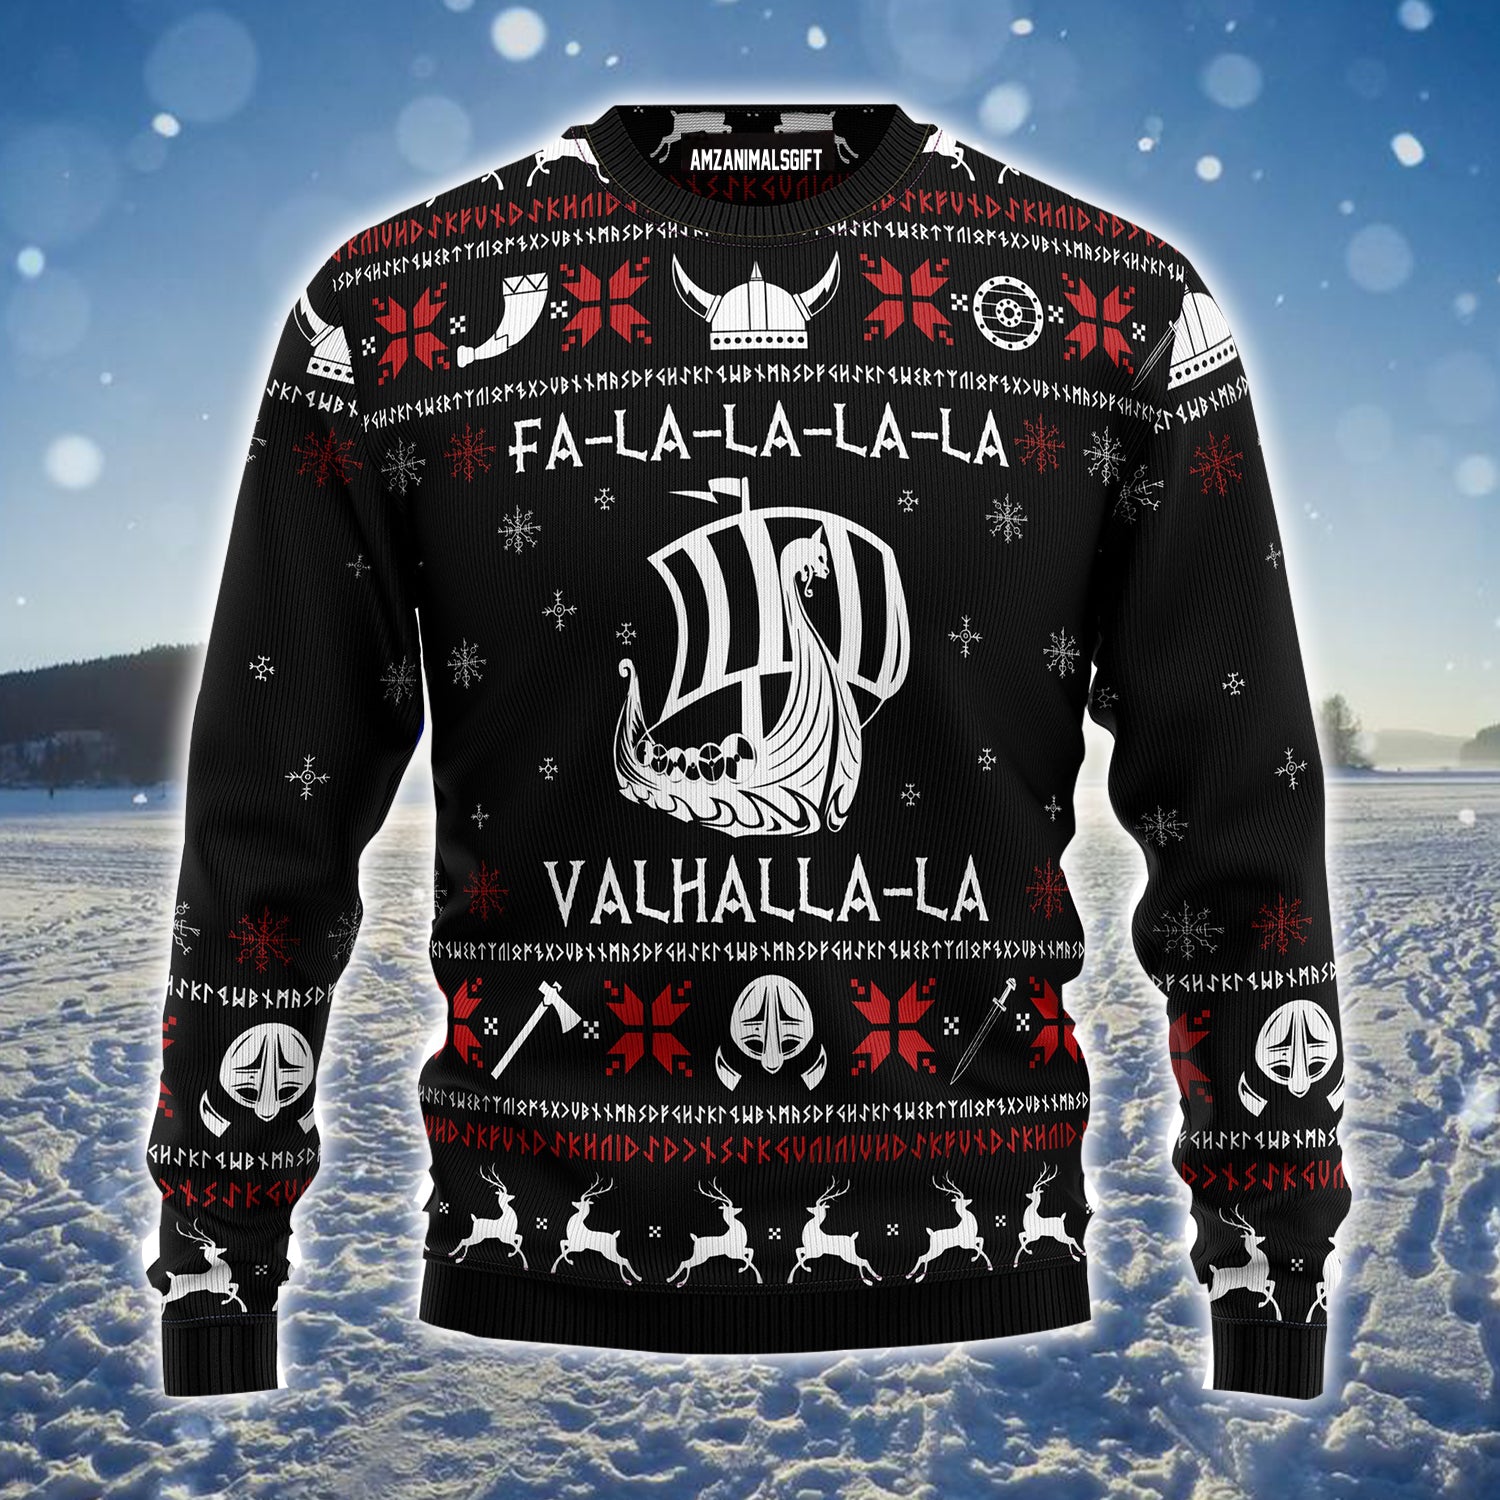 Valhalla Viking Ugly Christmas Sweater, Fa-la-la-la-la Christmas Pattern Ugly Sweater For Men & Women - Best Gift For Christmas, Viking Lovers